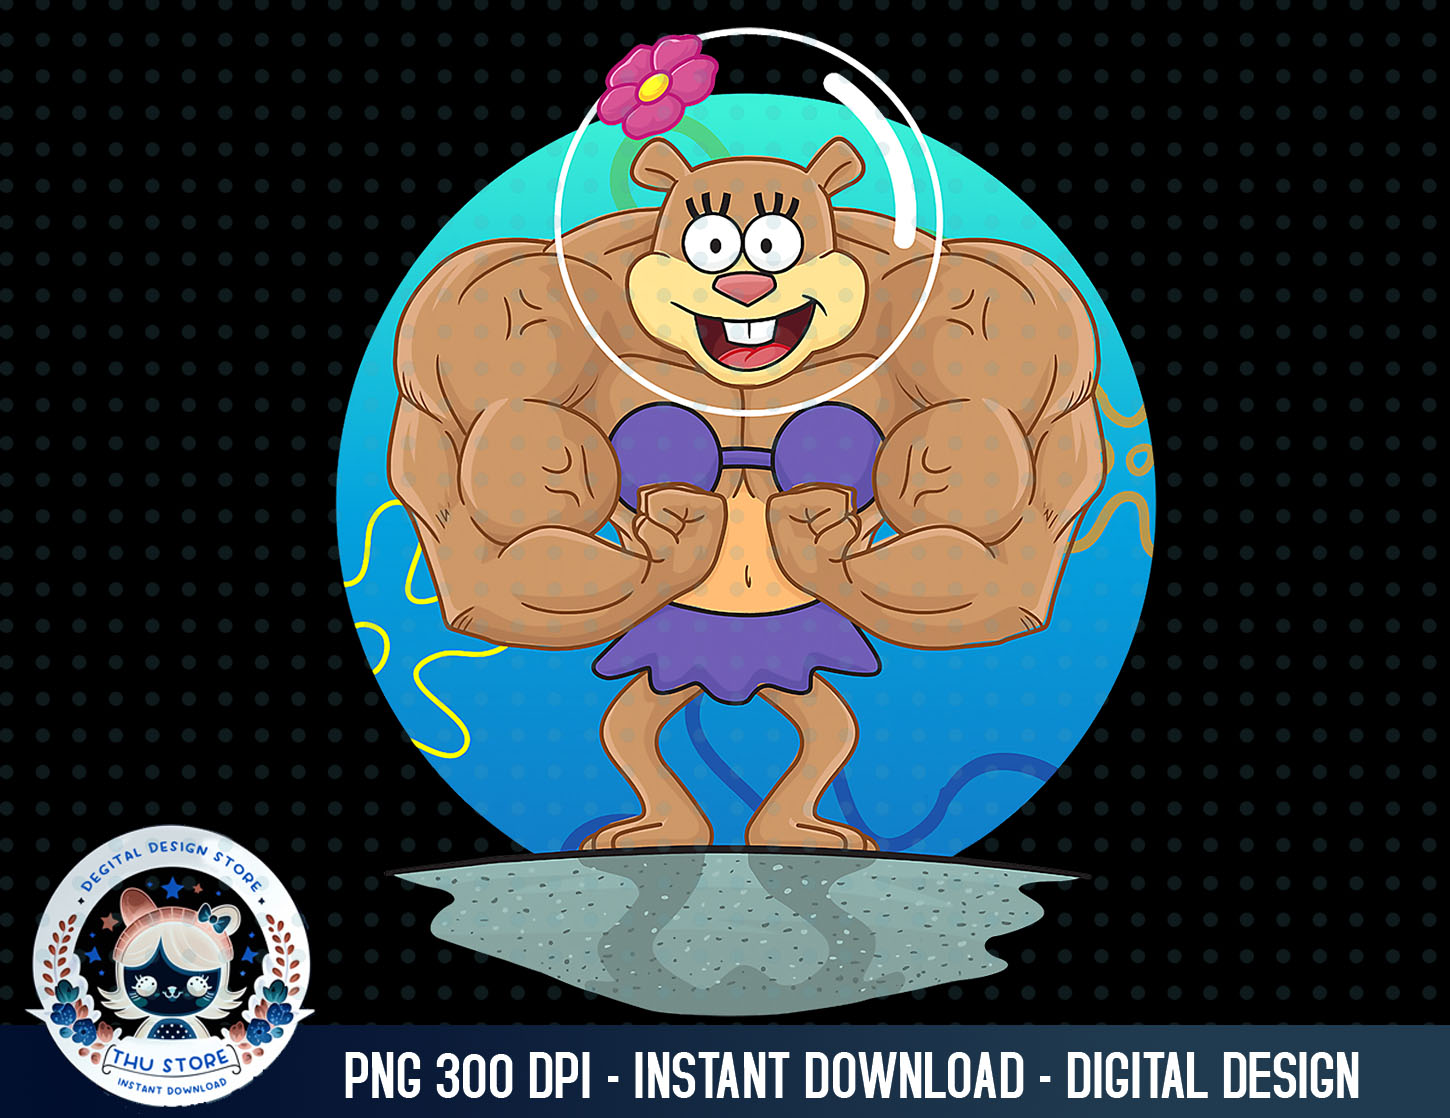 diamond chastain recommends sandy cheeks muscle growth pic